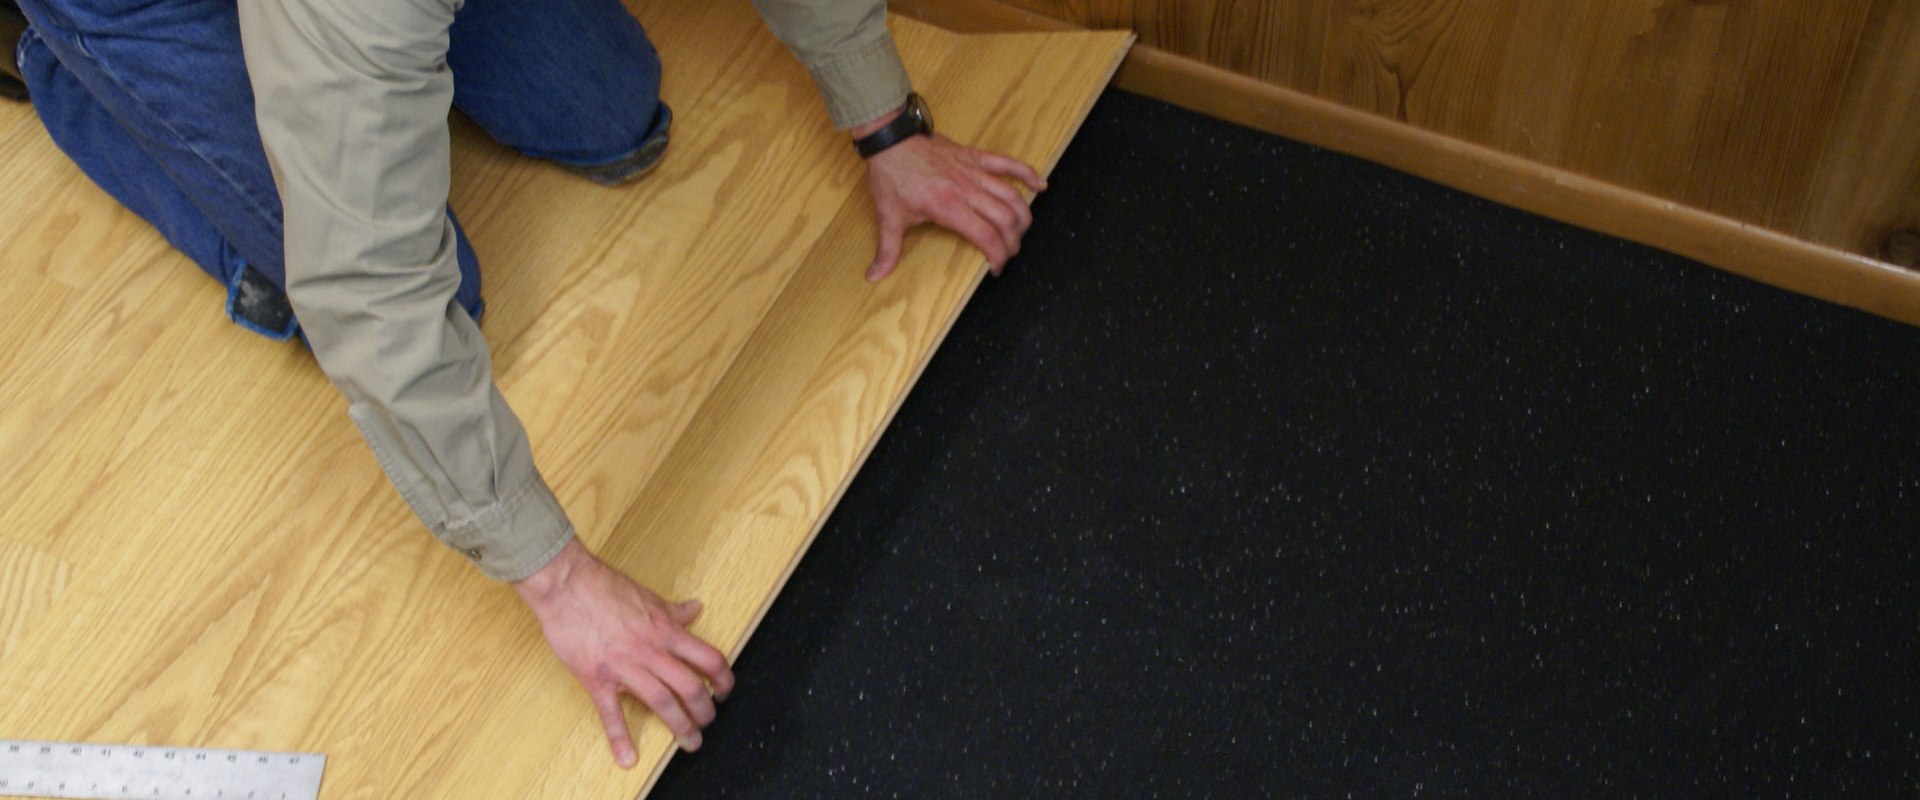 The Ultimate Guide to Installing Acoustic or Soundproofing Underlayment for Engineered Wood Floors